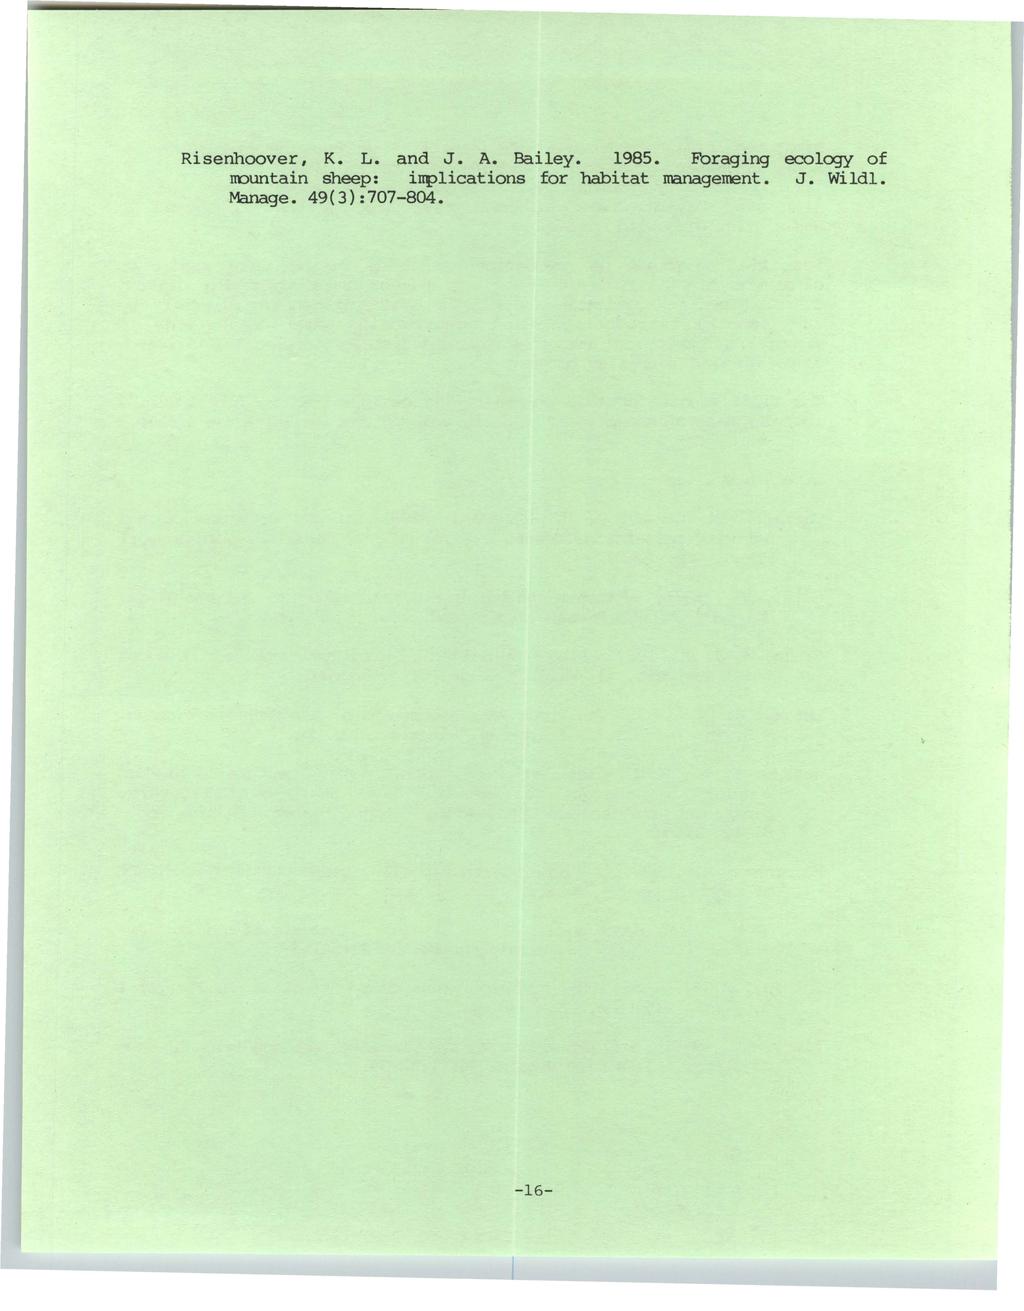 University of Wyoming National Park Service Research Center Annual Report, Vol. 11 [1987], Art. 3 Risenhoover, K. L. and J. A. Bailey. 1985.